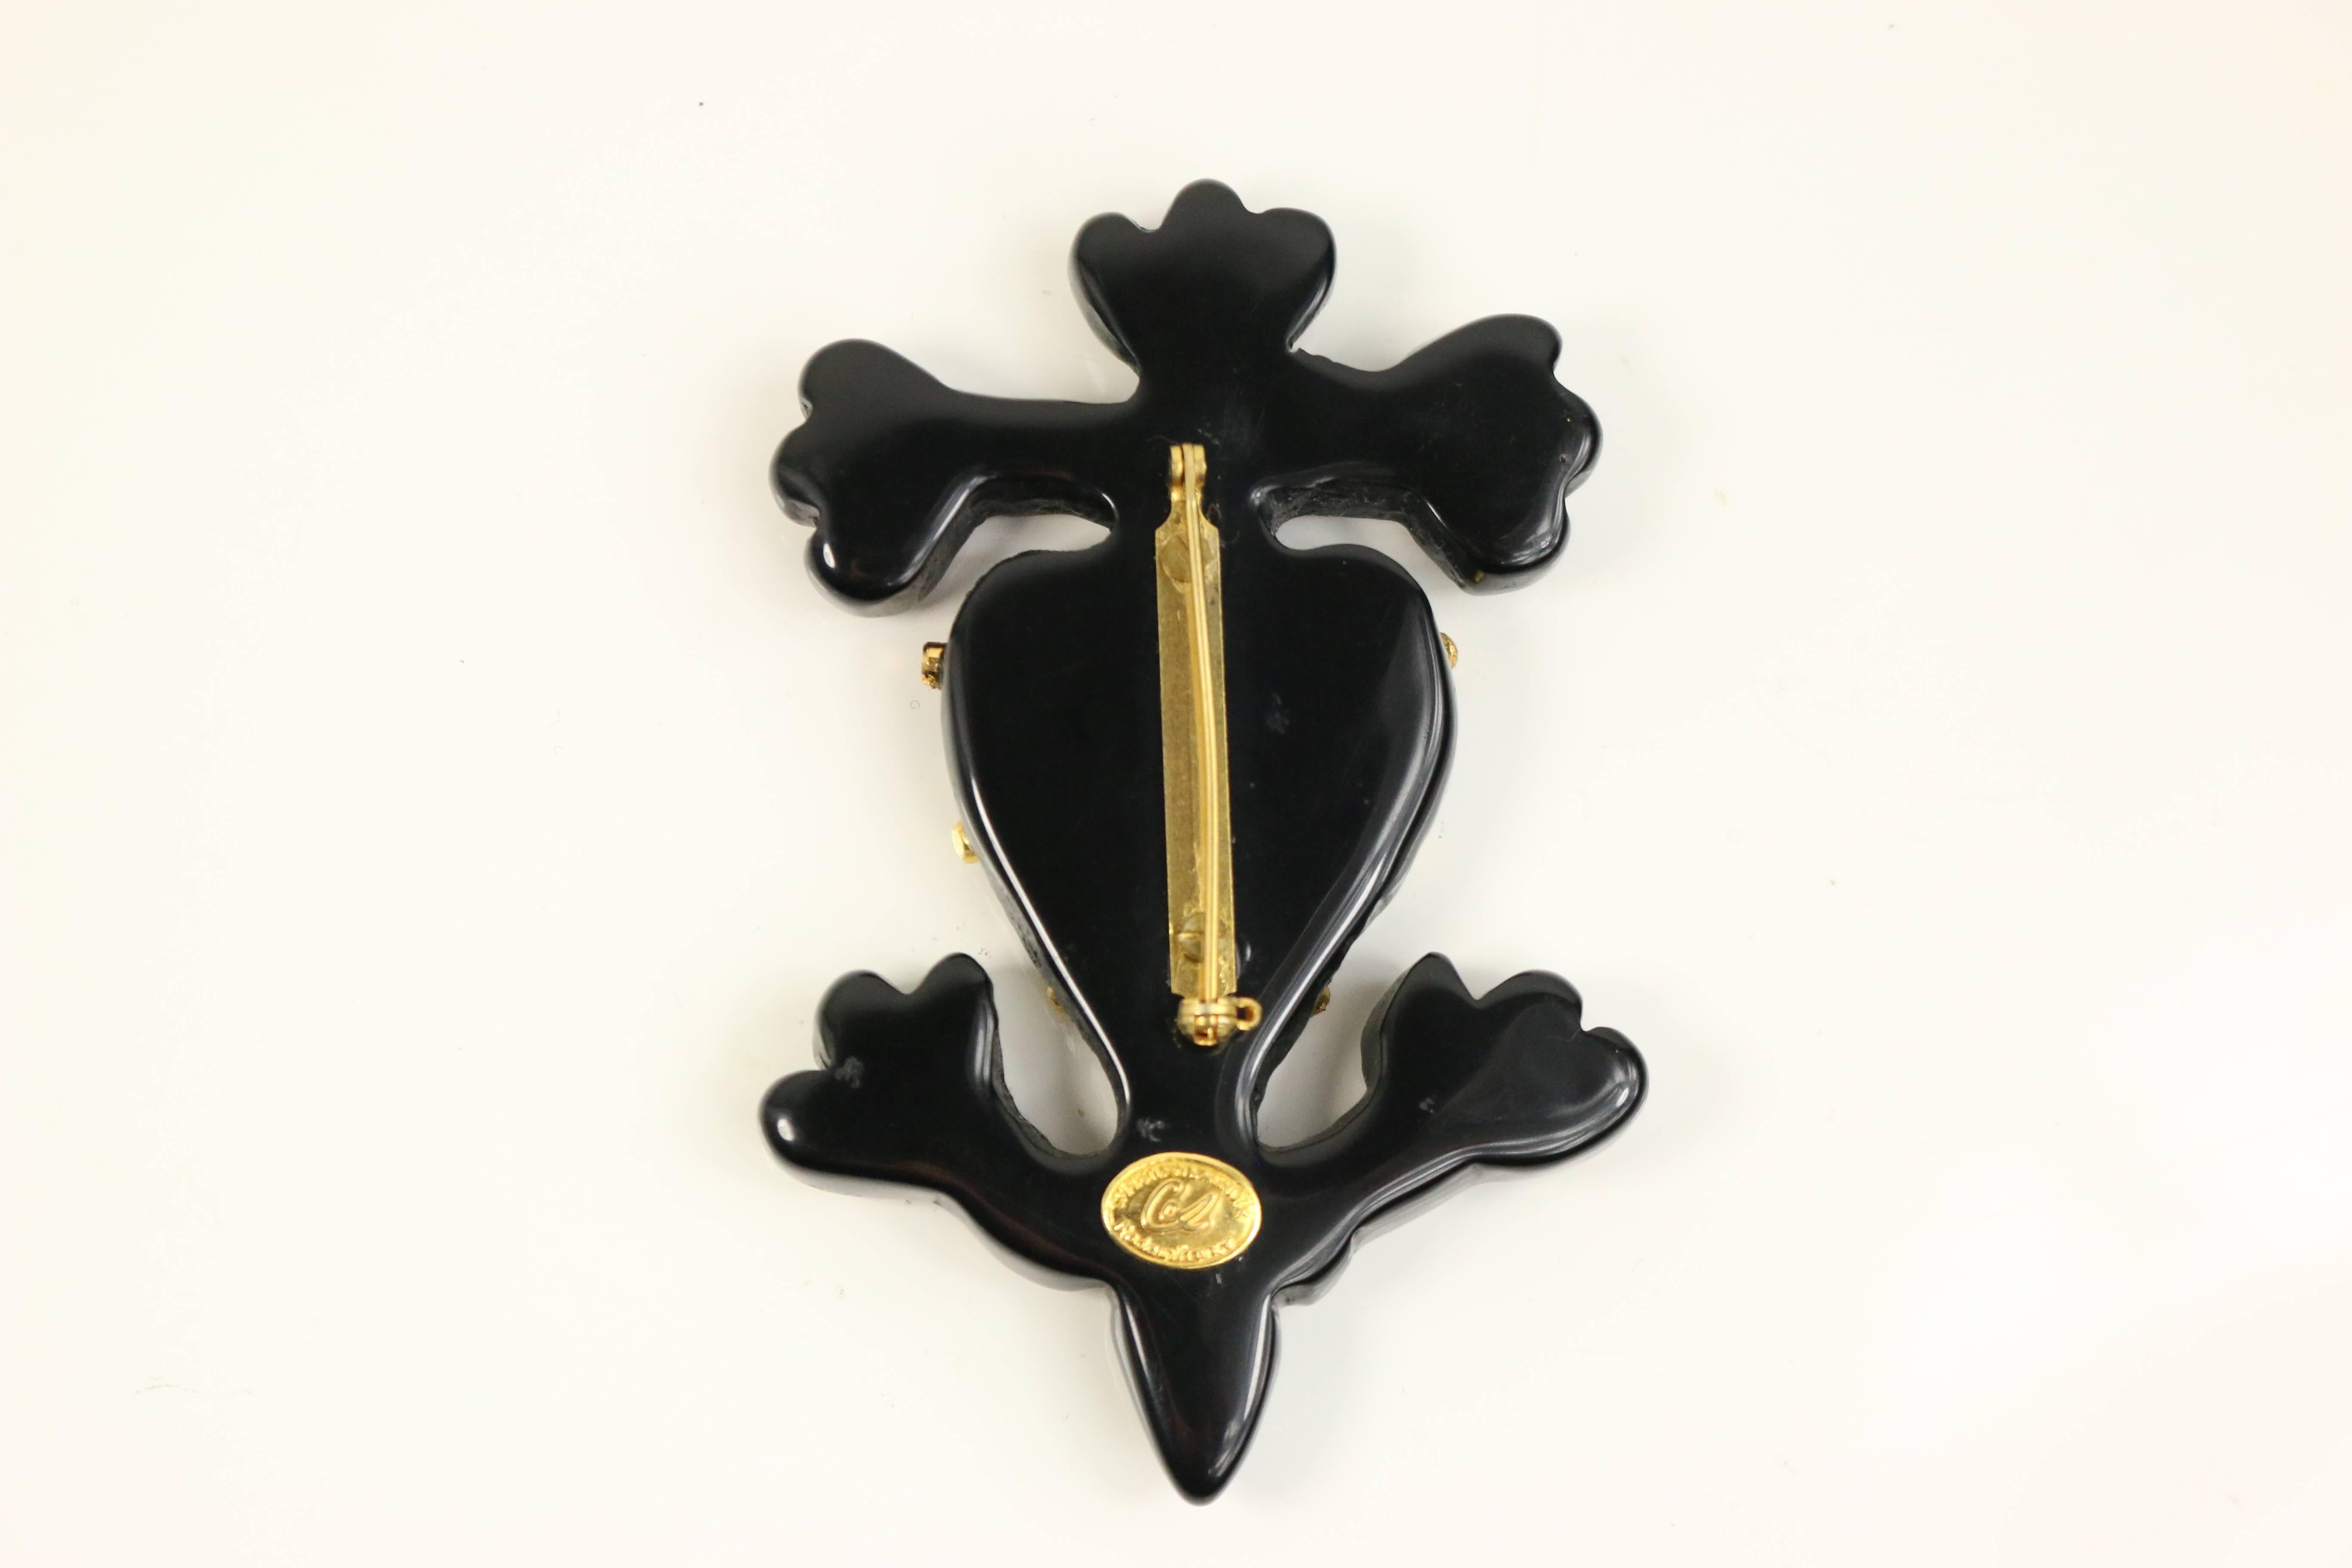 - Vintage 80s Christian Lacroix black with gold tone "sailor" like brooch with heart in in the center. 

- Made in Italy. 

- Height: 3.25 inches. Width: 2 inches. 

